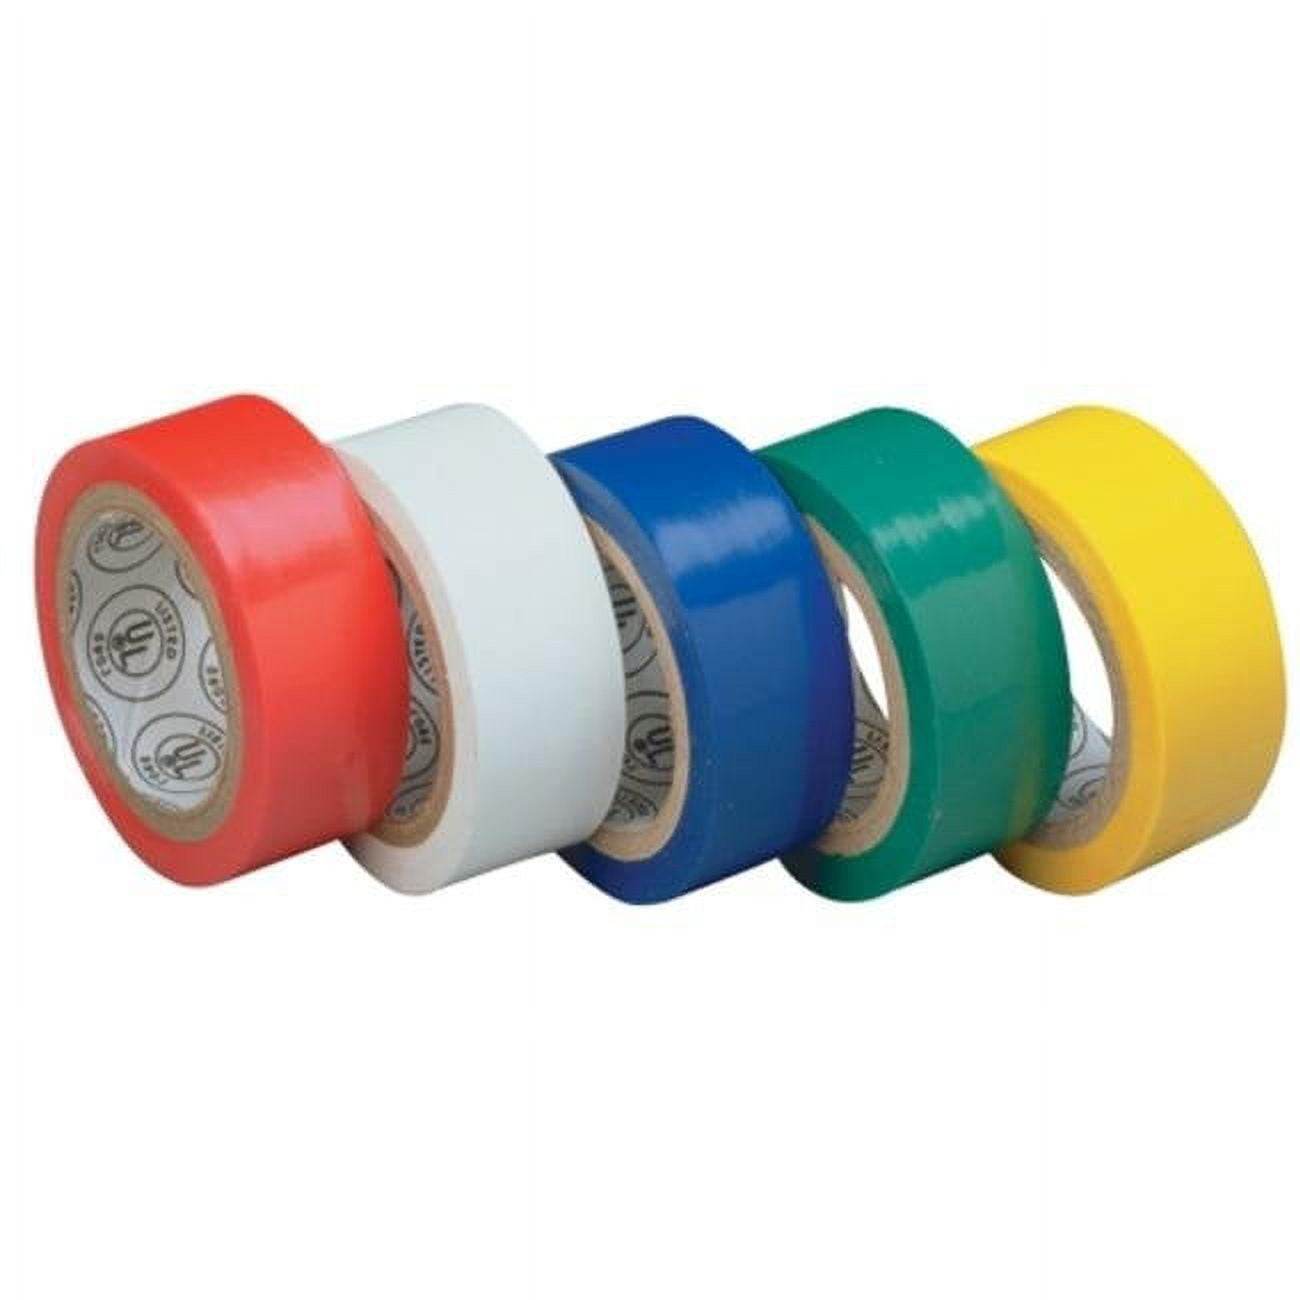 Scapa 175 Cloth Tape @ FindTape